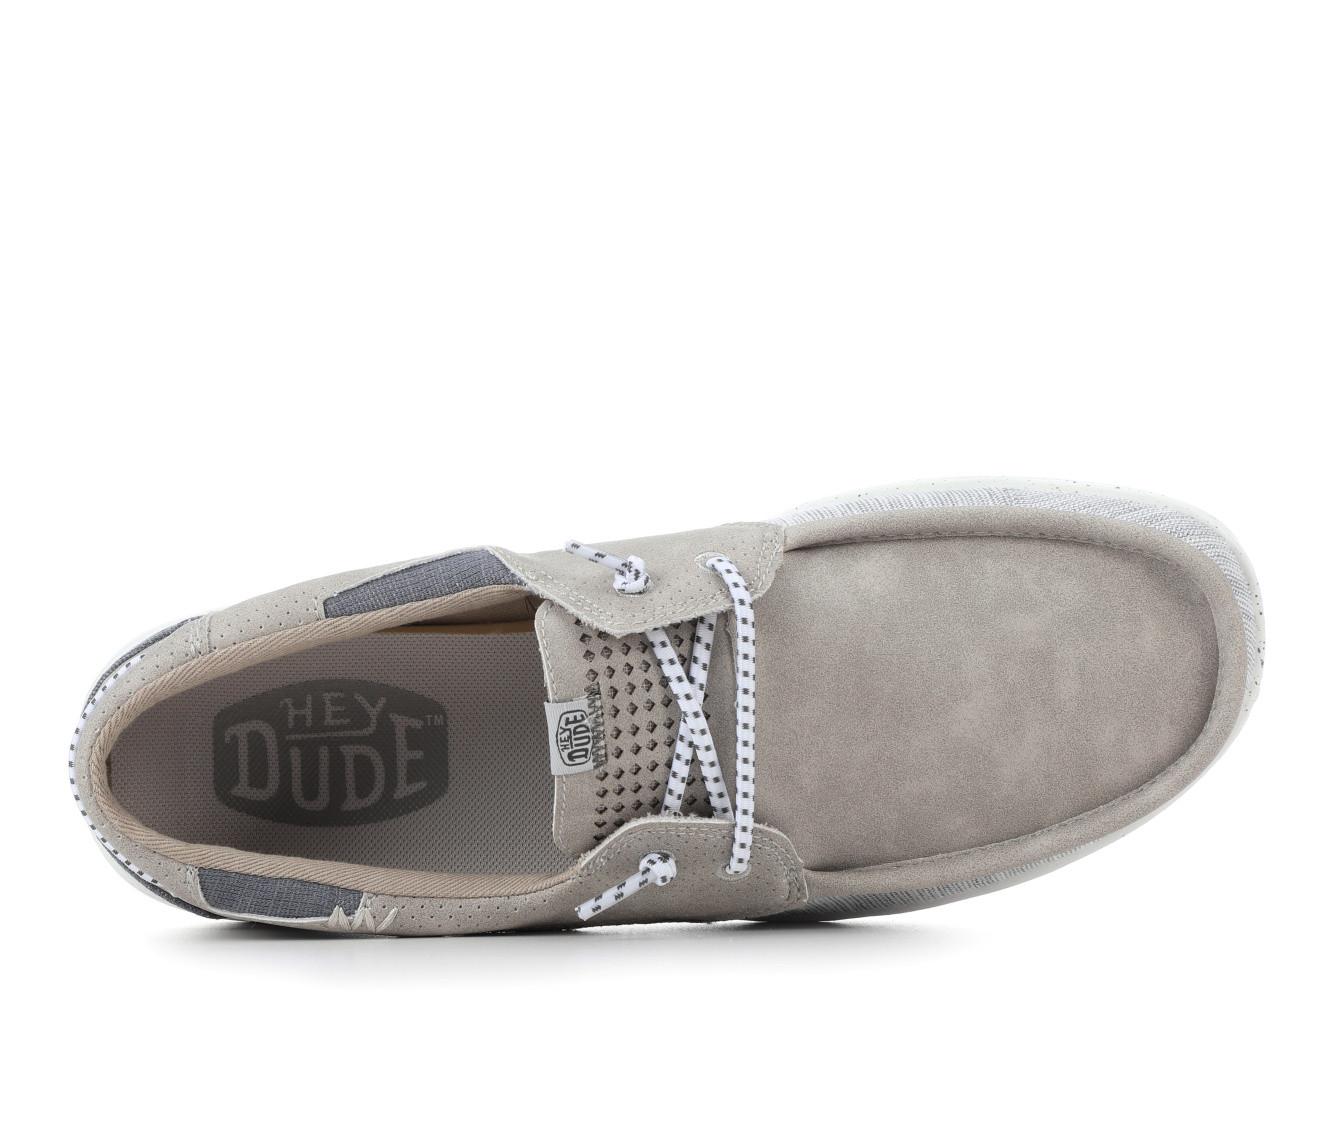 Men's HEYDUDE Welsh Grip Mix-M Casual Shoes